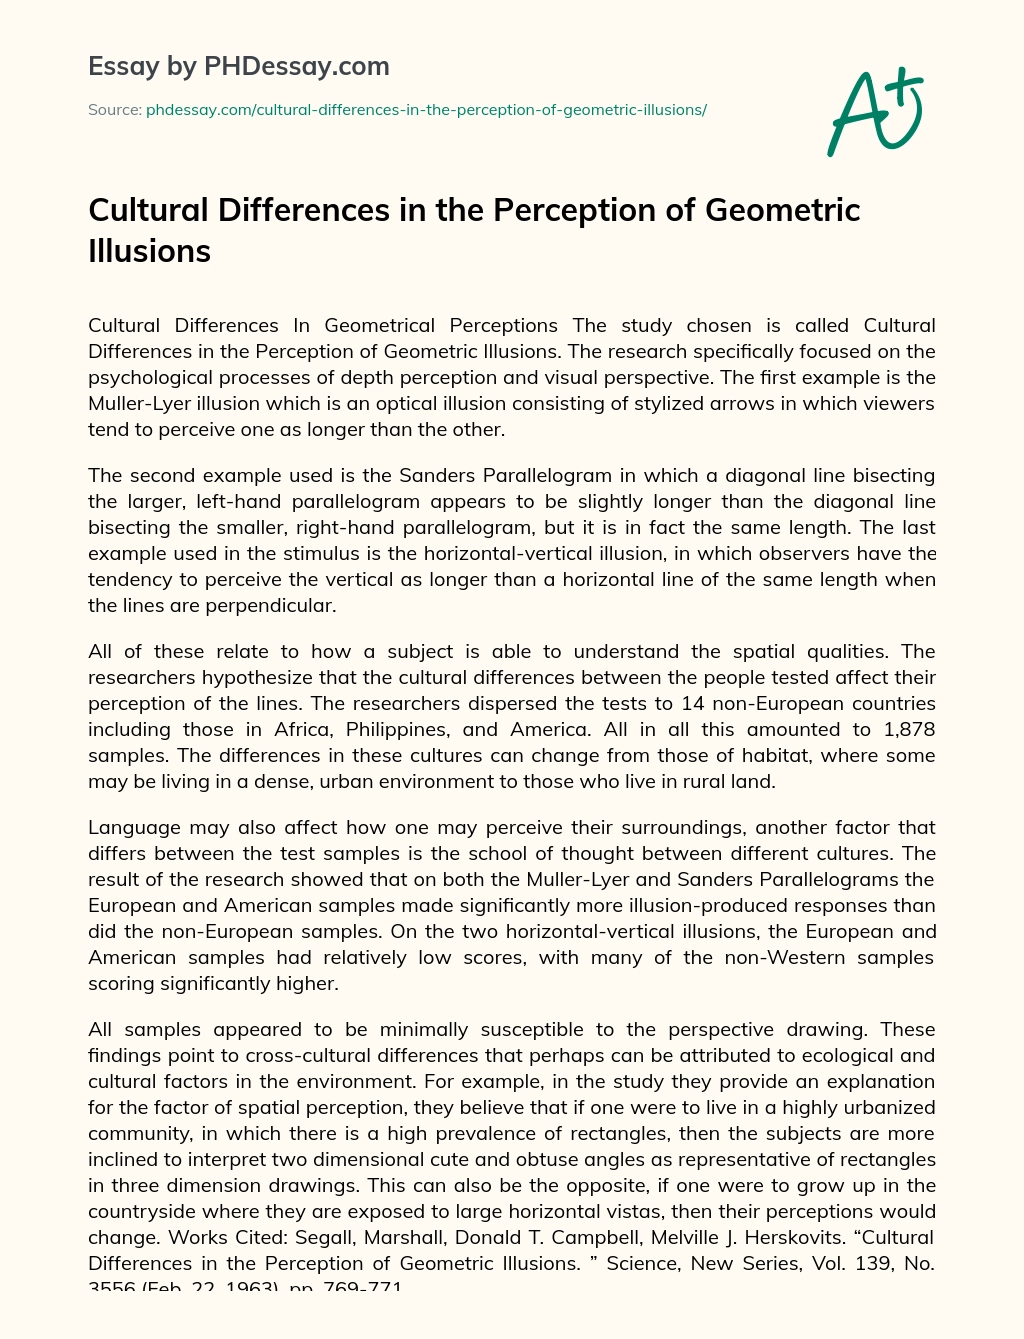 Cultural Differences in the Perception of Geometric Illusions essay